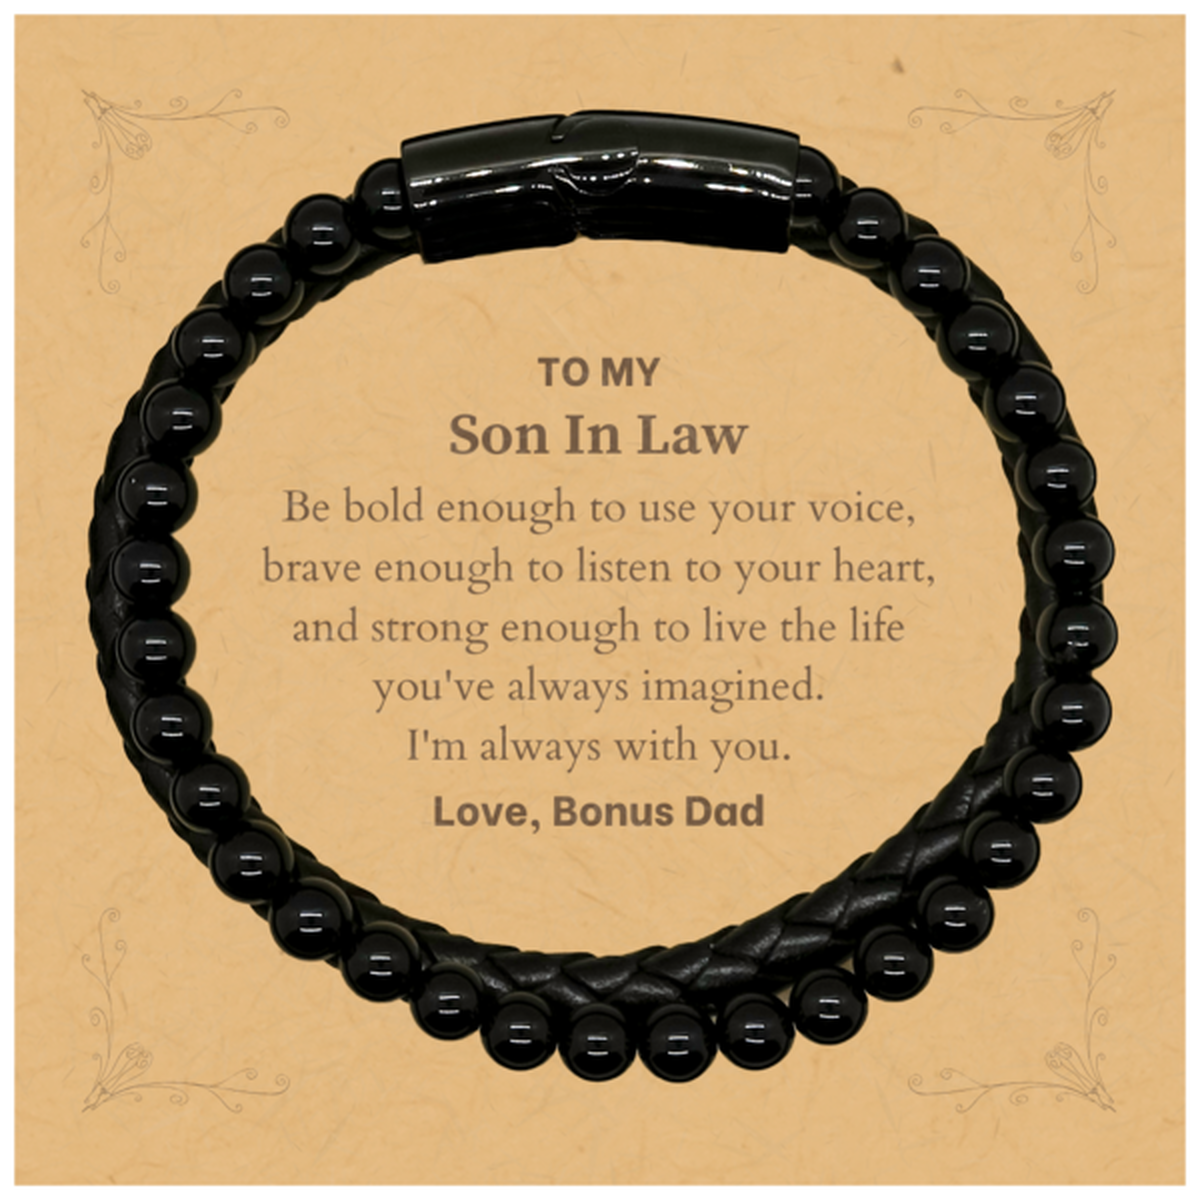 Keepsake Son In Law Stone Leather Bracelets Gift Idea Graduation Christmas Birthday Son In Law from Bonus Dad, Son In Law Be bold enough to use your voice, brave enough to listen to your heart. Love, Bonus Dad